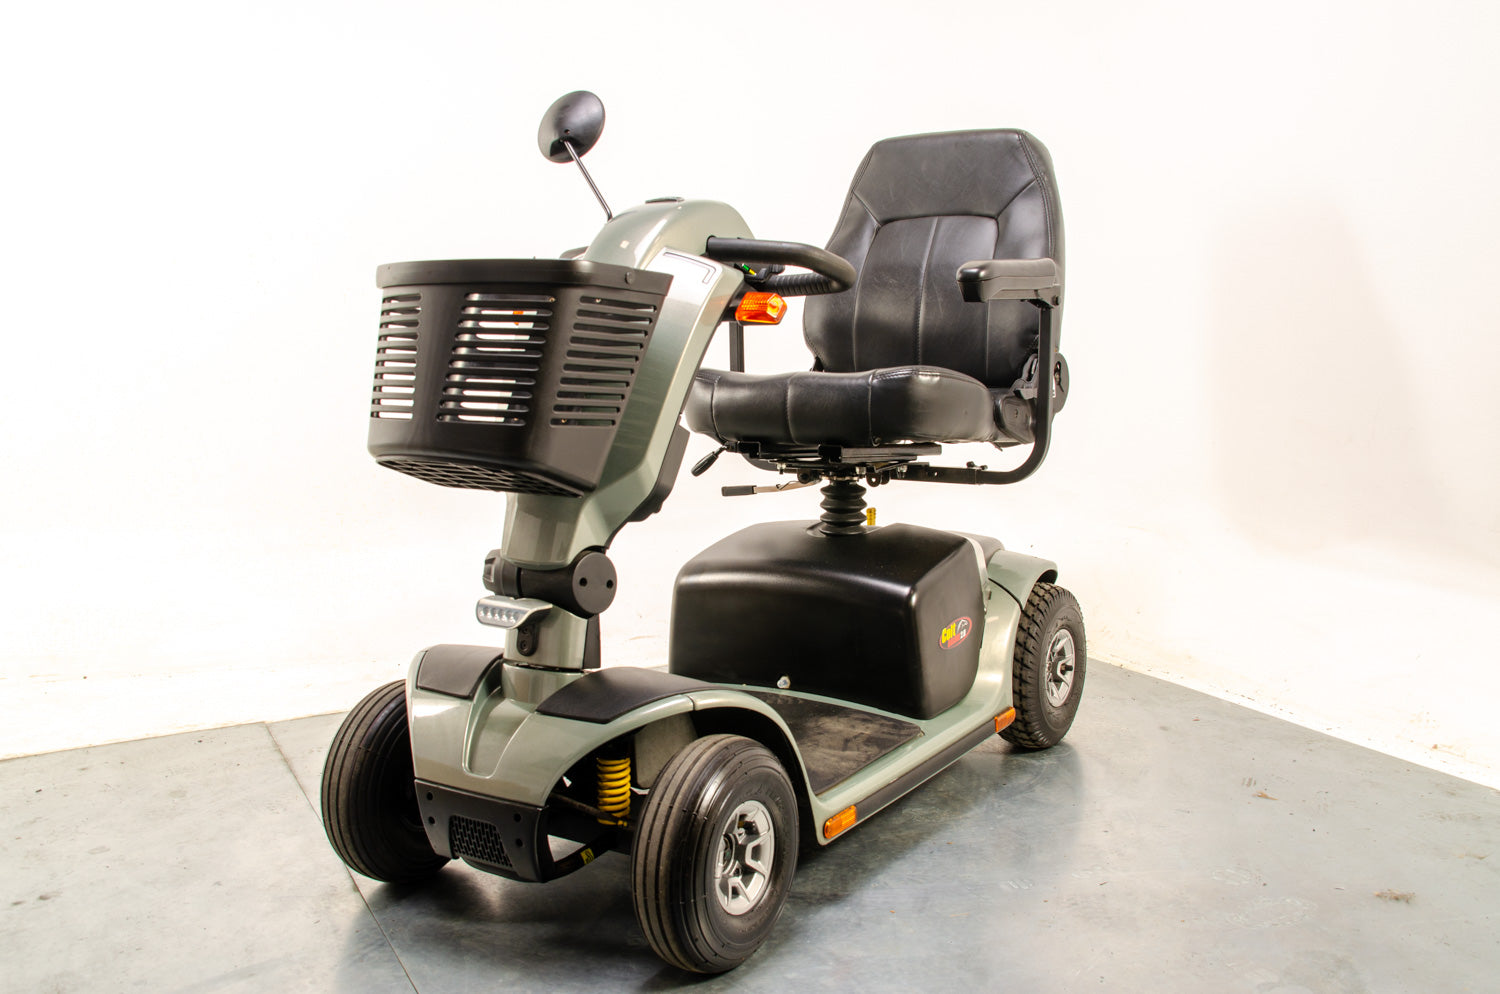 Pride Colt Deluxe 2.0 Electric Mobility Scooter Transportable Folding 6mph Road Pavement